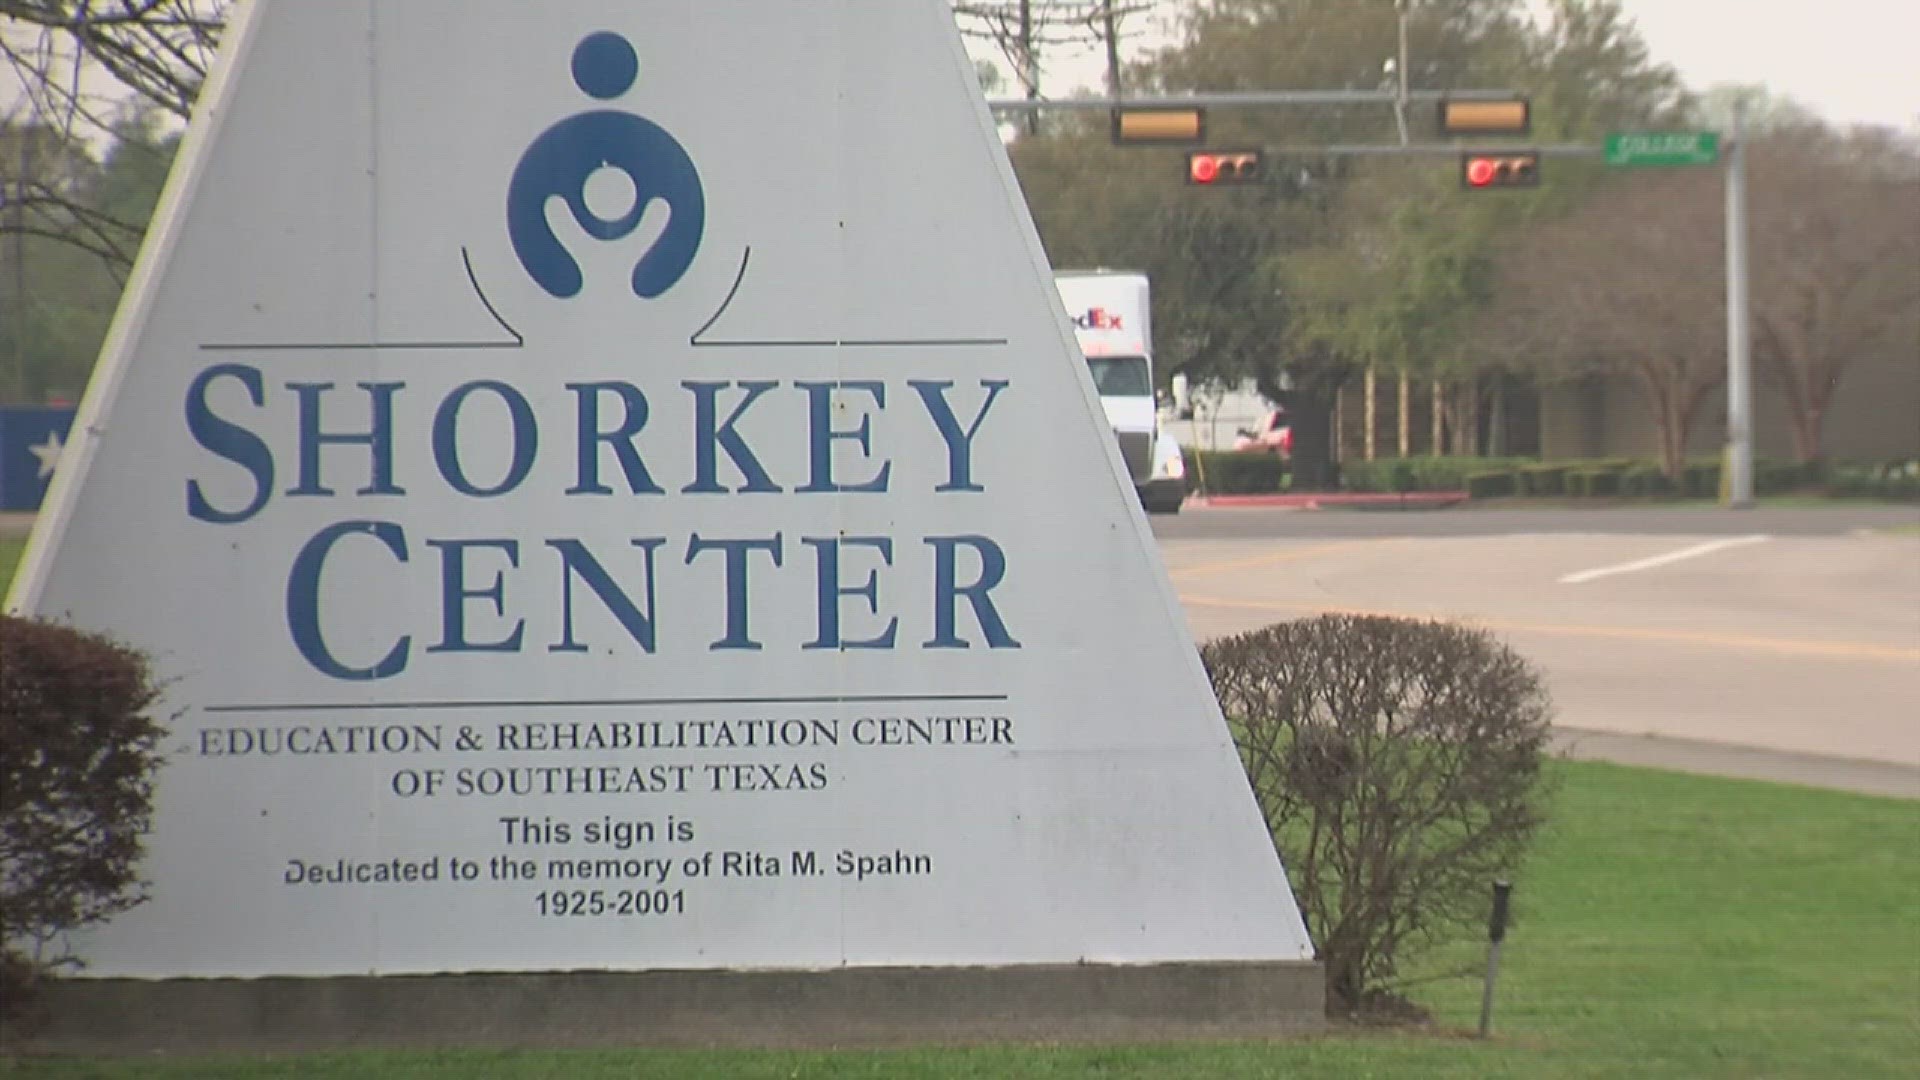 The Shorkey Center offers everything from physical, speech, applied behavior analysis , recreation and aquatic therapy for kids with disabilities.